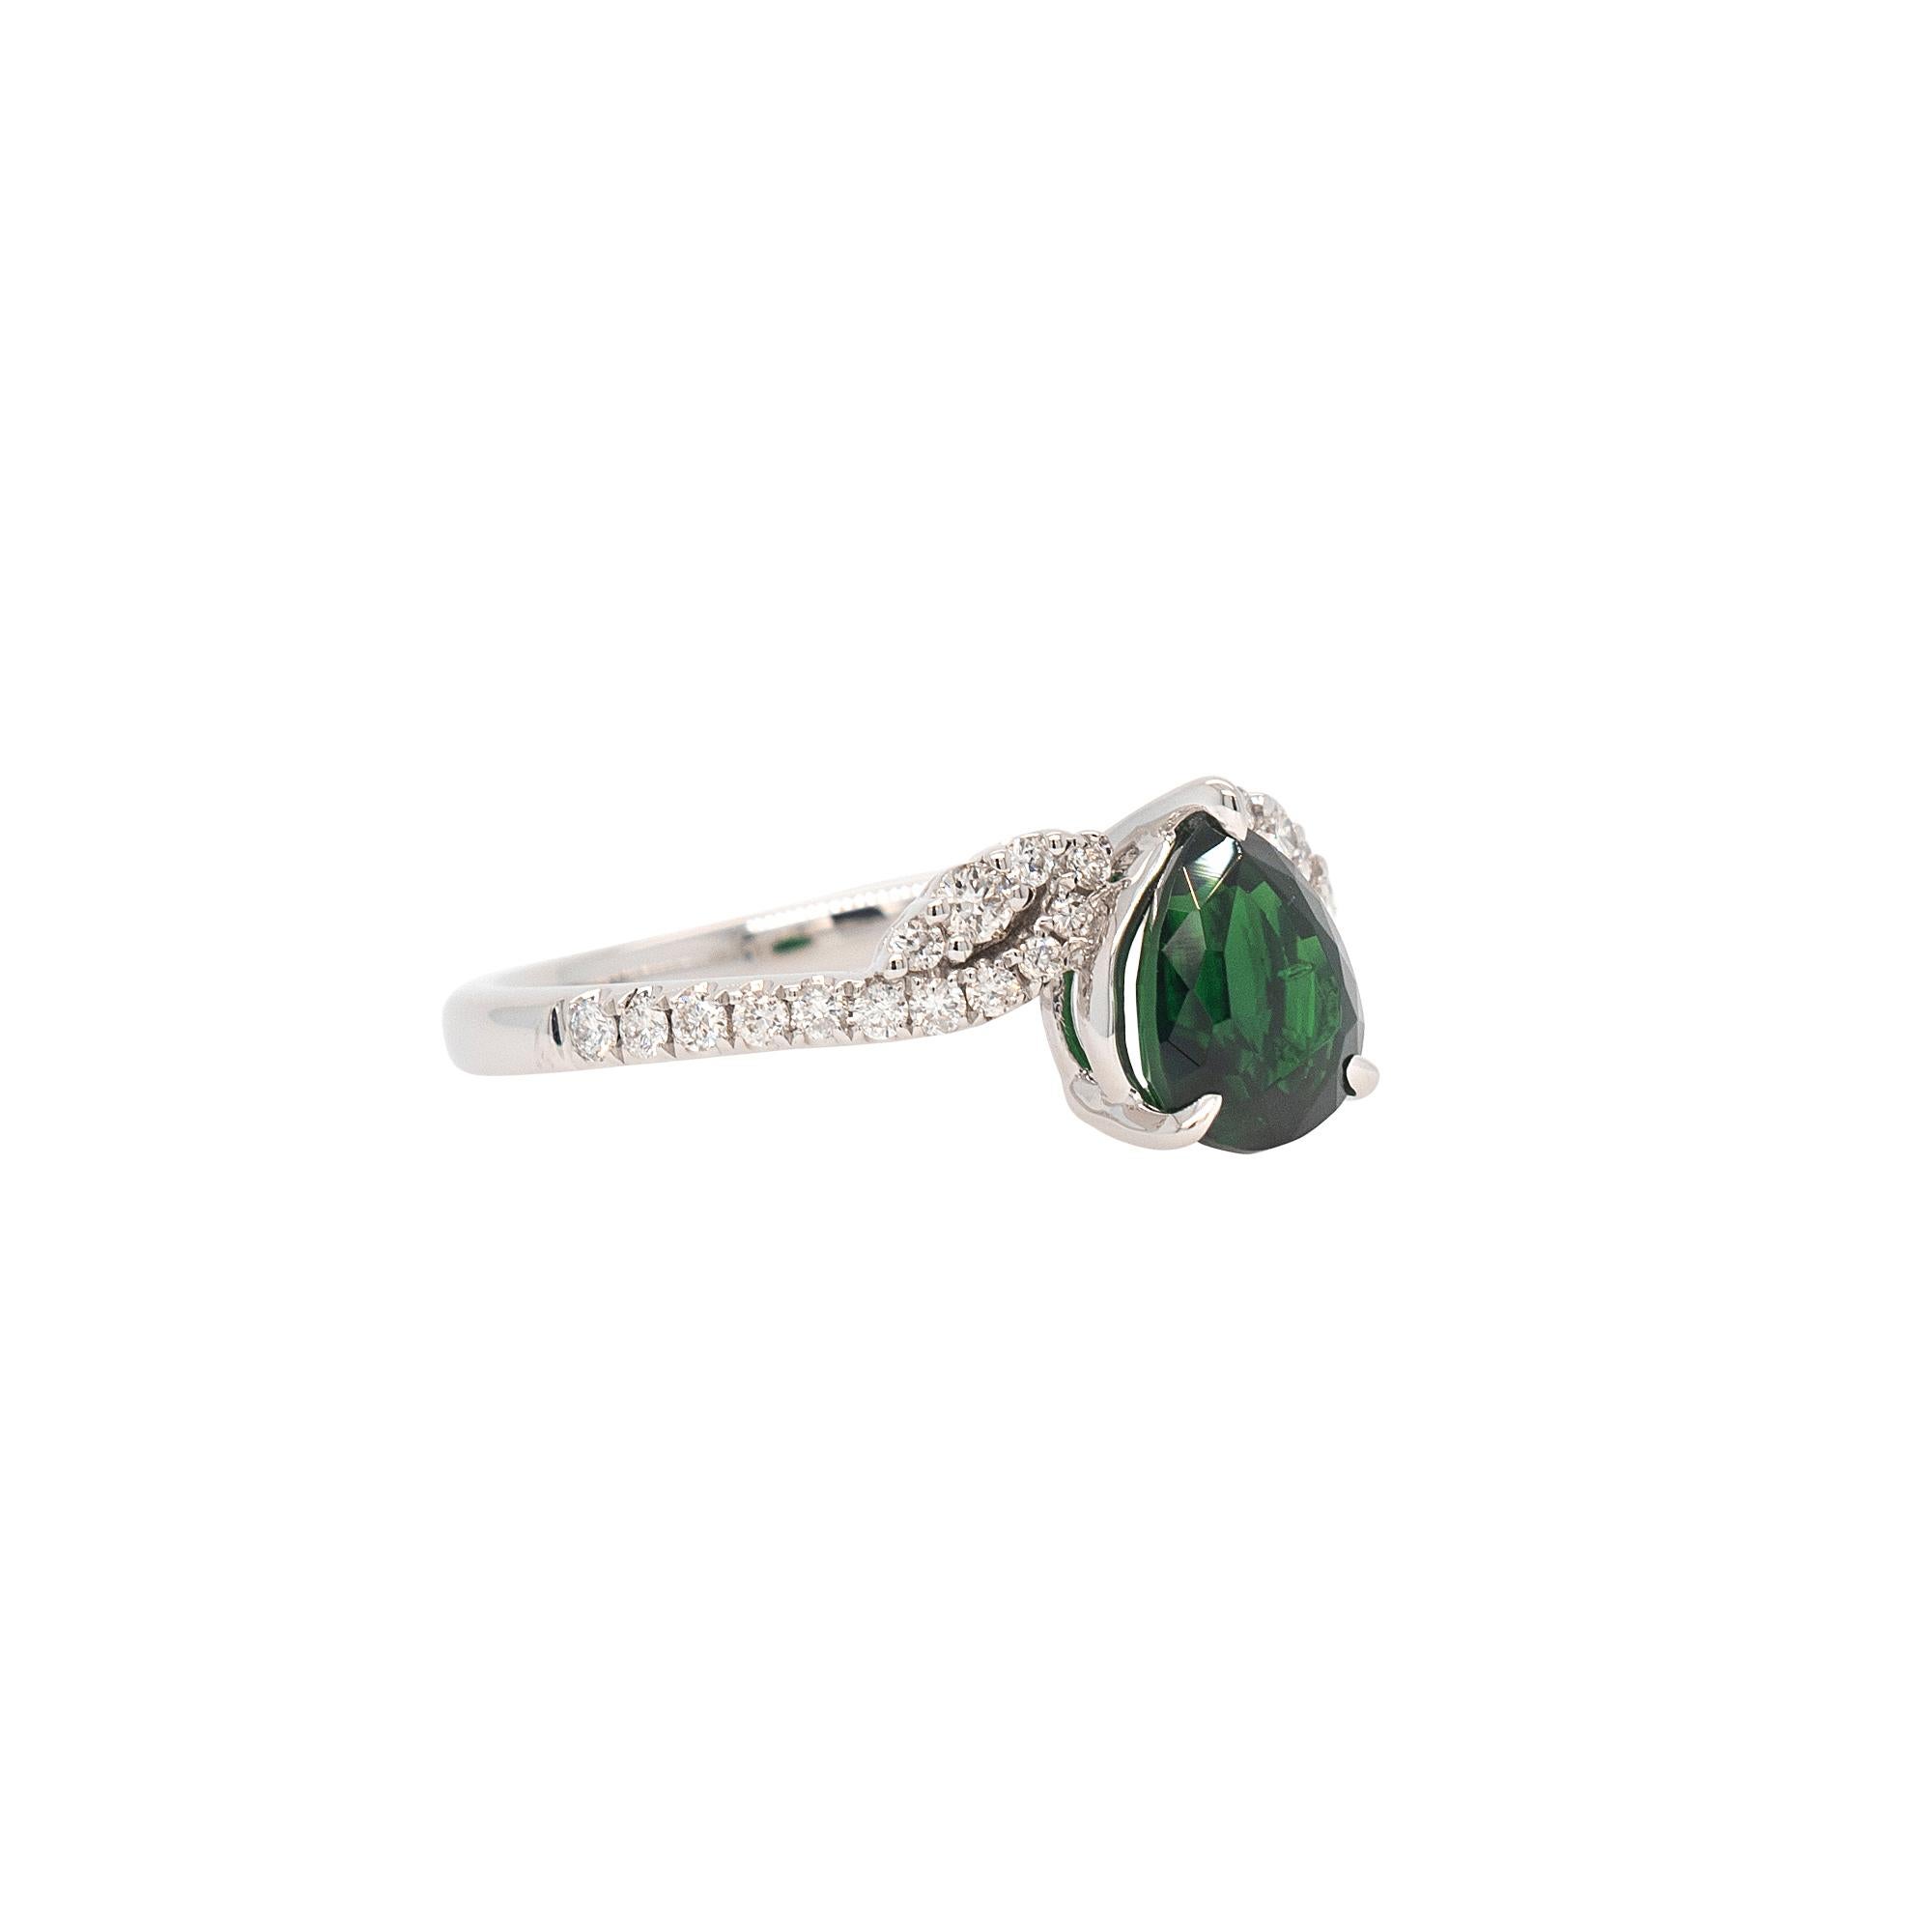 Stone Details:
1.20ct Green Emerald Gemstone
0.25ct Round Brilliant Natural Diamond
G Color VS Clarity
Ring Material: 18k White Gold
Ring Size: 6.5 (can be sized)
Measurements: 8.0mm x 6.3mm x 3.9mm
Total Weight: 3.3g (2.1dwt)
This item comes with a